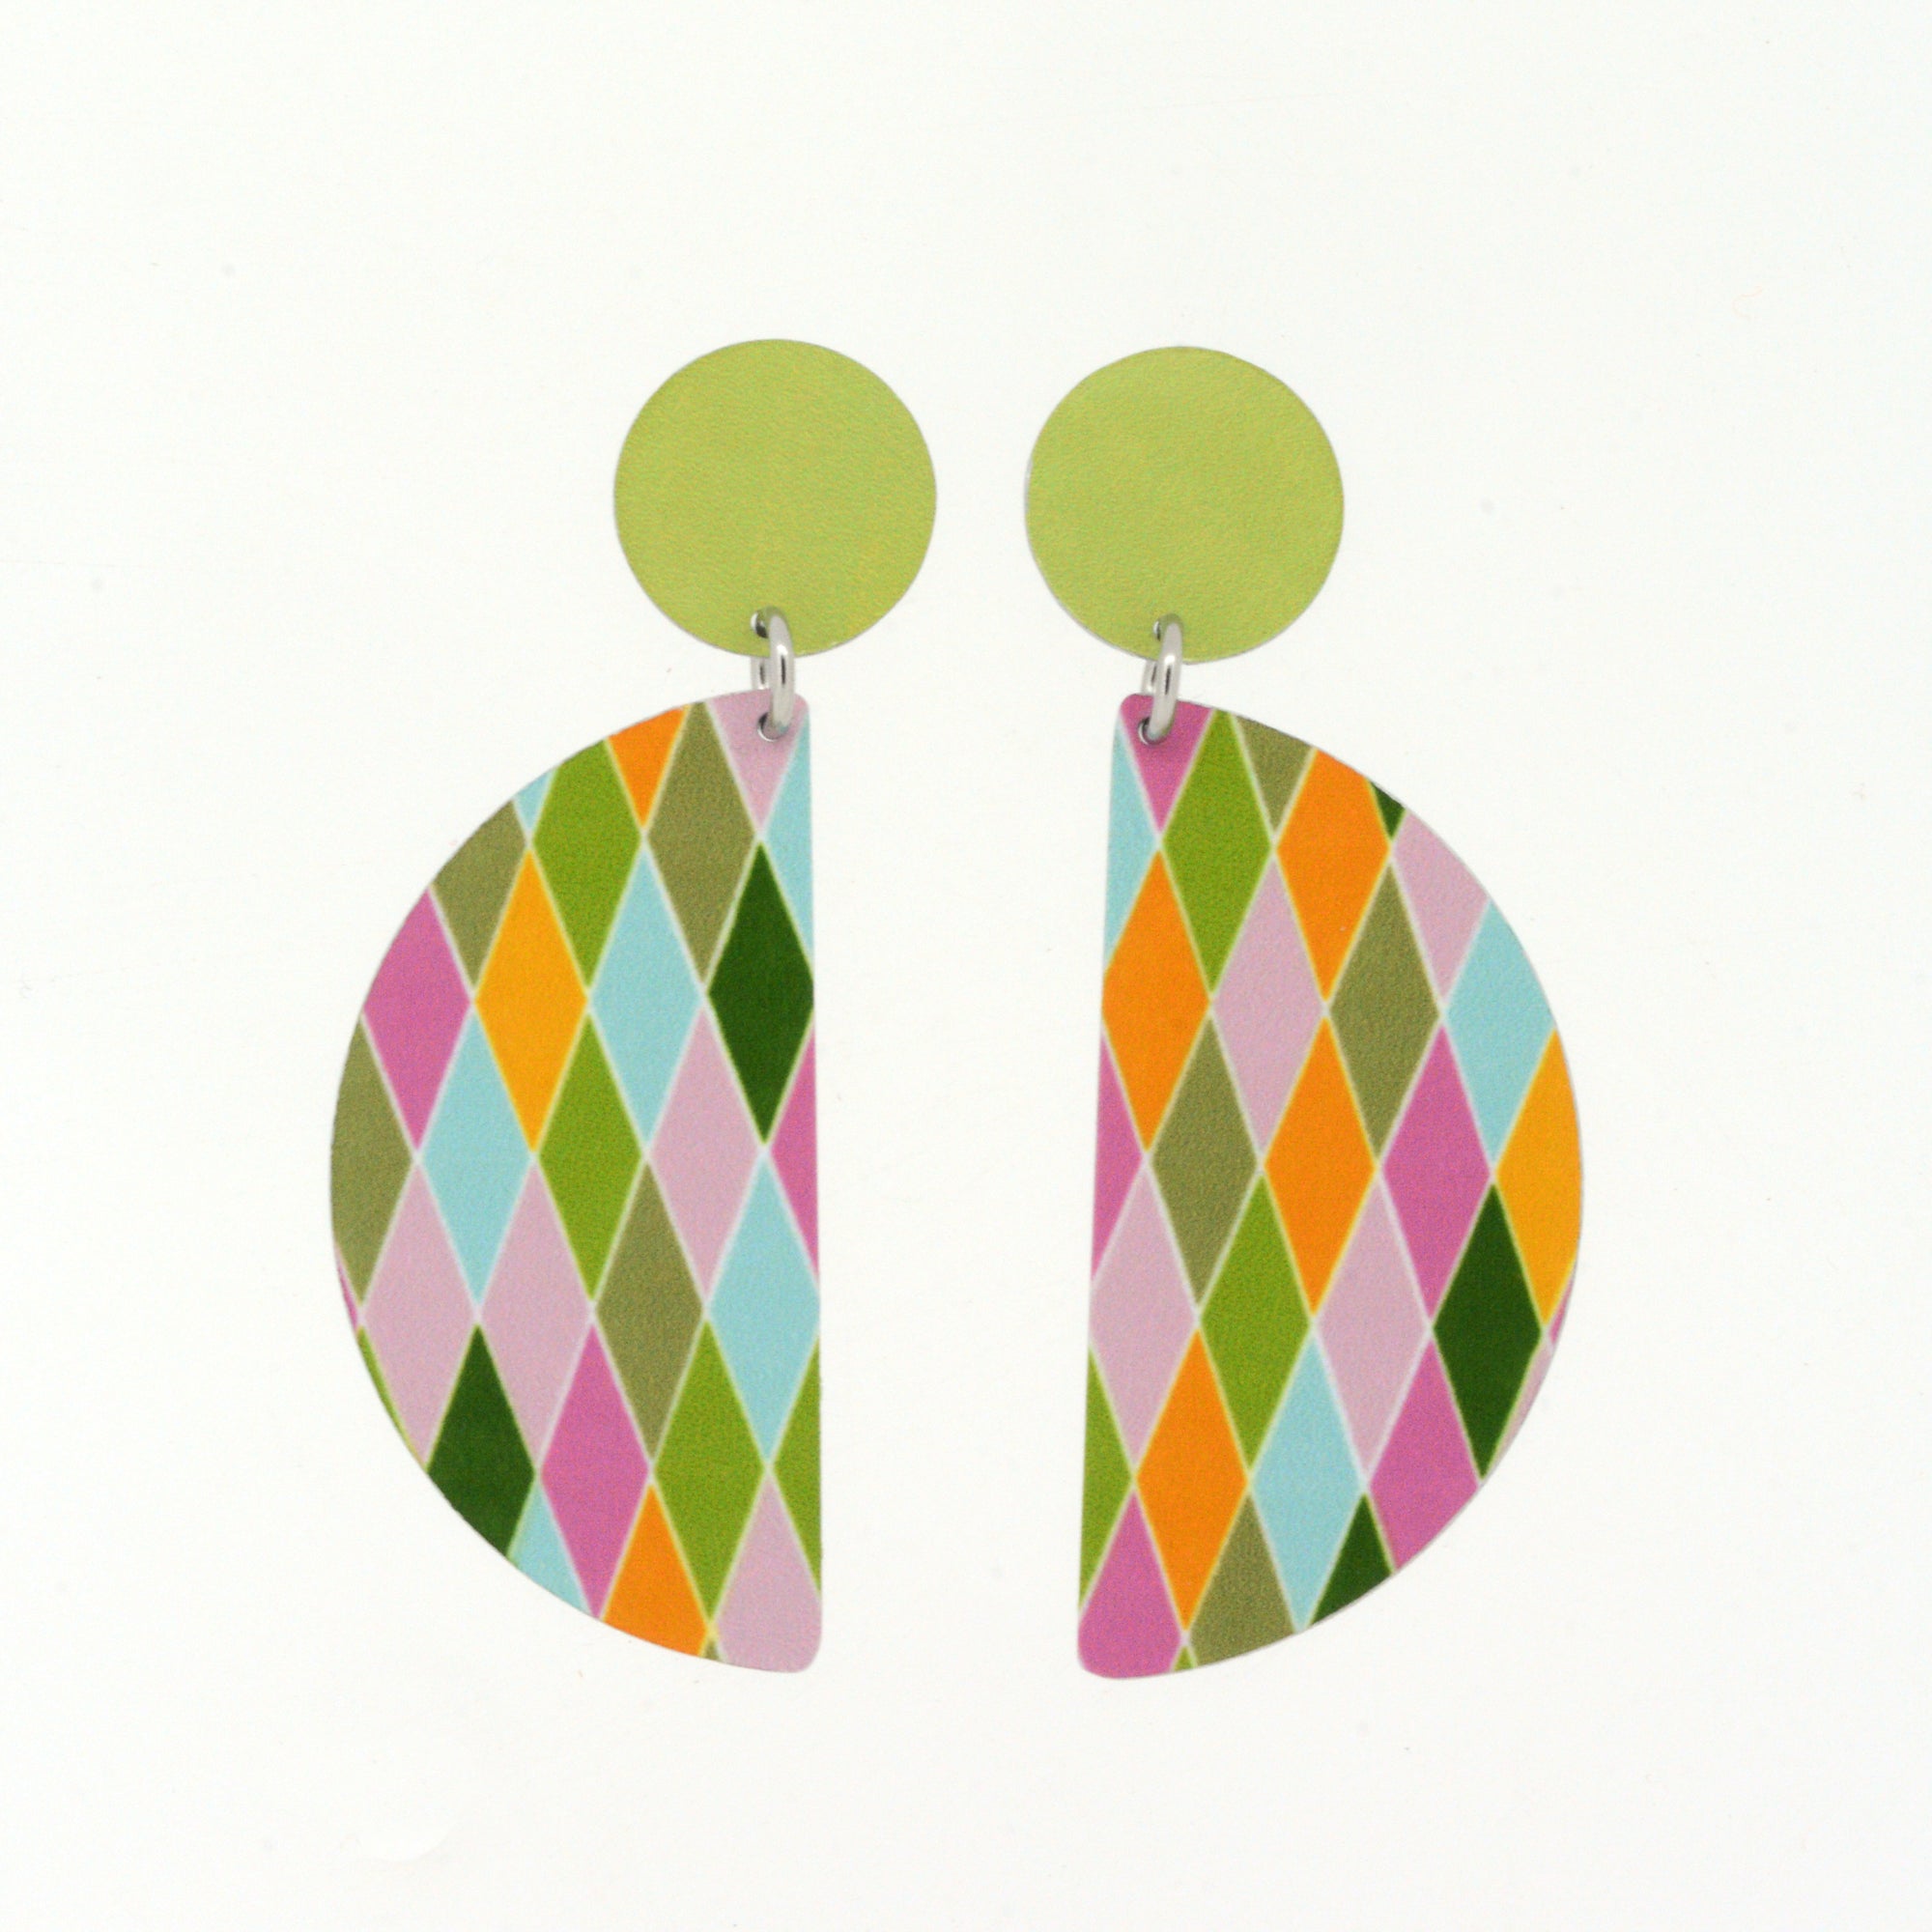 The is a photograph of earrings. 36 millimetre diameter semi-circles in a colourful harlequin pattern dangle from 12 millimetre green circle studs. The colours are pinks, blue, greens and yellows and originate from a photograph of daisies.